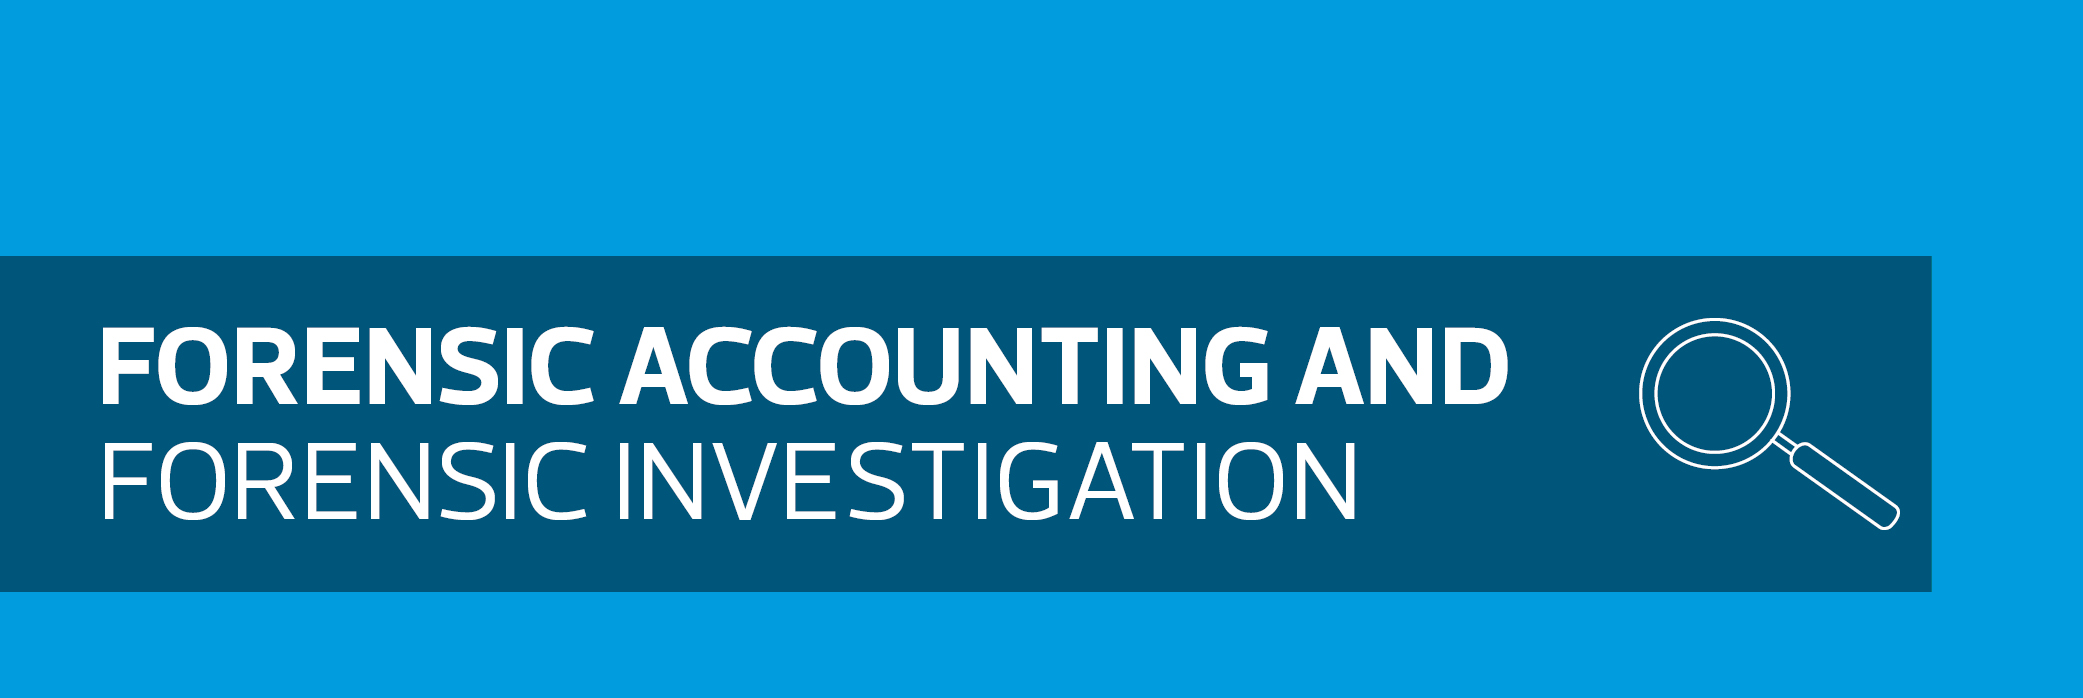 Forensic accounitng and forensic investigation